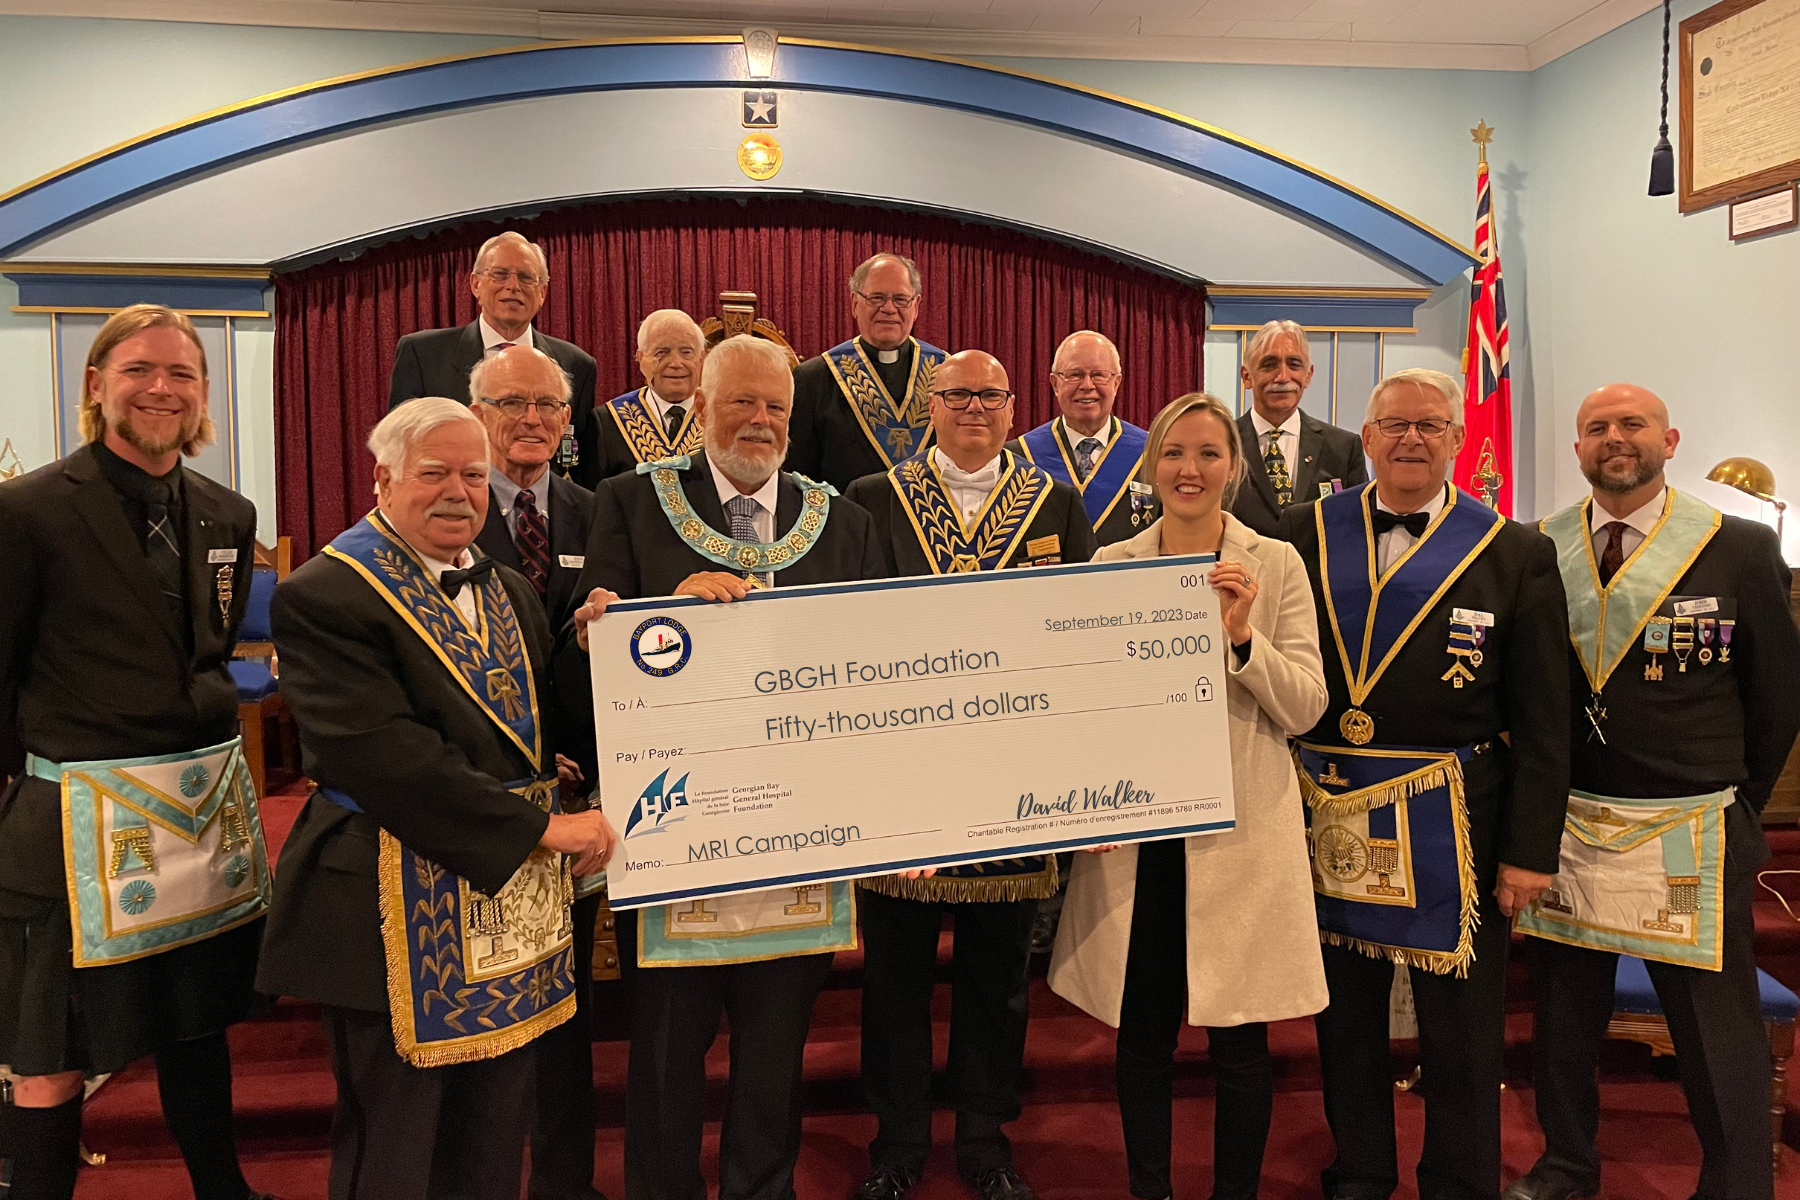 Twelve men wearing Lodge regalia present a giant cheque to a women who represents the GBGH Foundation for $50, 000 from the Bayfort Lodge